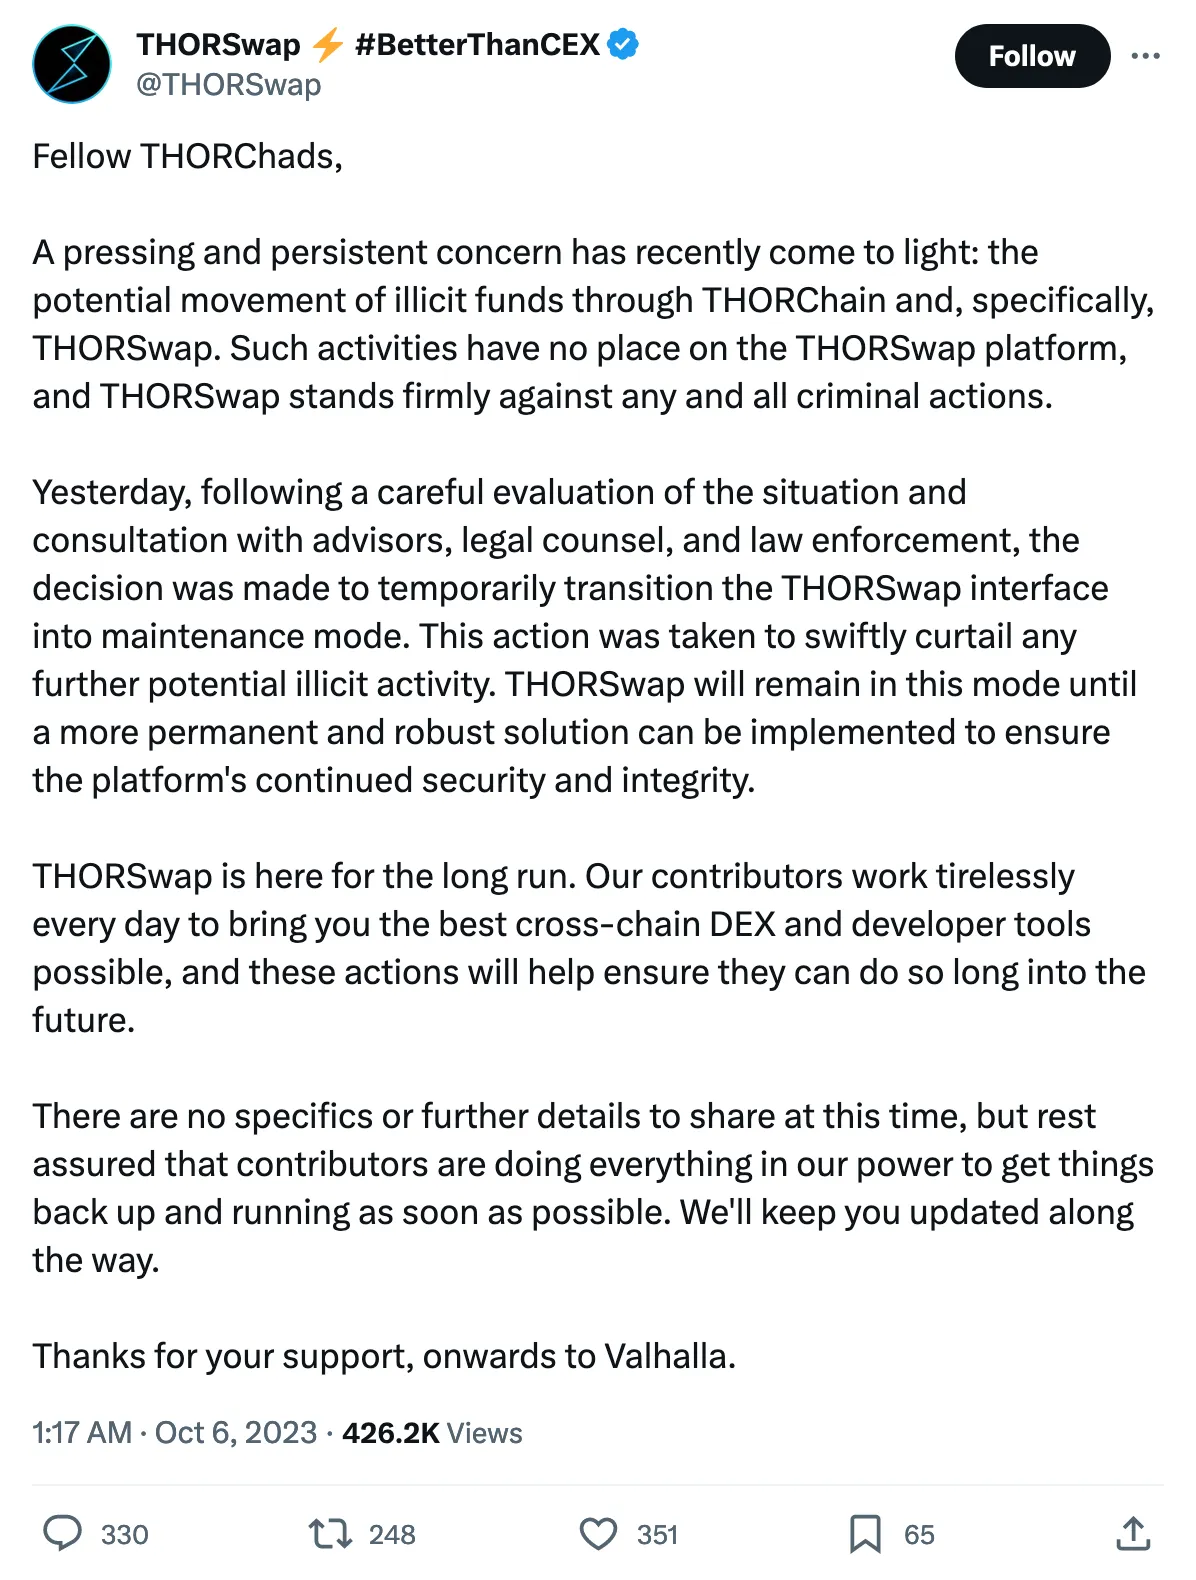 Fellow THORChads,

A pressing and persistent concern has recently come to light: the potential movement of illicit funds through THORChain and, specifically, THORSwap. Such activities have no place on the THORSwap platform, and THORSwap stands firmly against any and all criminal actions.

Yesterday, following a careful evaluation of the situation and consultation with advisors, legal counsel, and law enforcement, the decision was made to temporarily transition the THORSwap interface into maintenance mode. This action was taken to swiftly curtail any further potential illicit activity. THORSwap will remain in this mode until a more permanent and robust solution can be implemented to ensure the platform's continued security and integrity.

THORSwap is here for the long run. Our contributors work tirelessly every day to bring you the best cross-chain DEX and developer tools possible, and these actions will help ensure they can do so long into the future.

There are no specifics or further details to share at this time, but rest assured that contributors are doing everything in our power to get things back up and running as soon as possible. We'll keep you updated along the way.

Thanks for your support, onwards to Valhalla. 
Tweeted at 1:17 AM · Oct 6, 2023